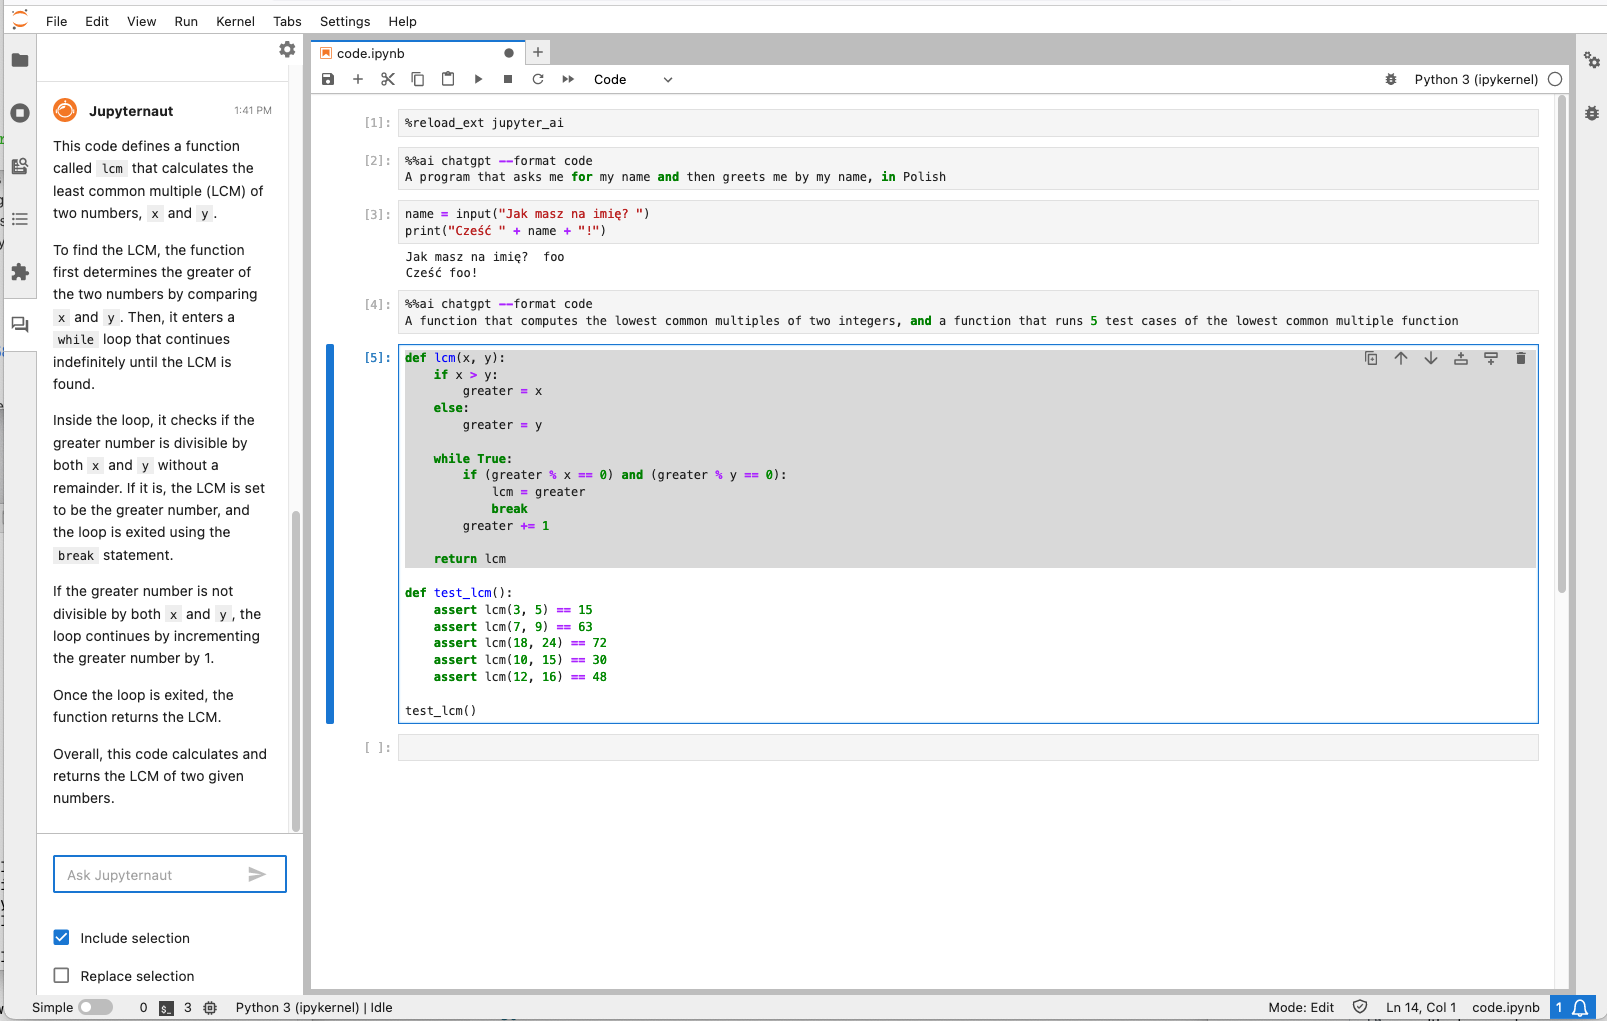 A screenshot of Jupyter AI showing the chat interface and the magic commands